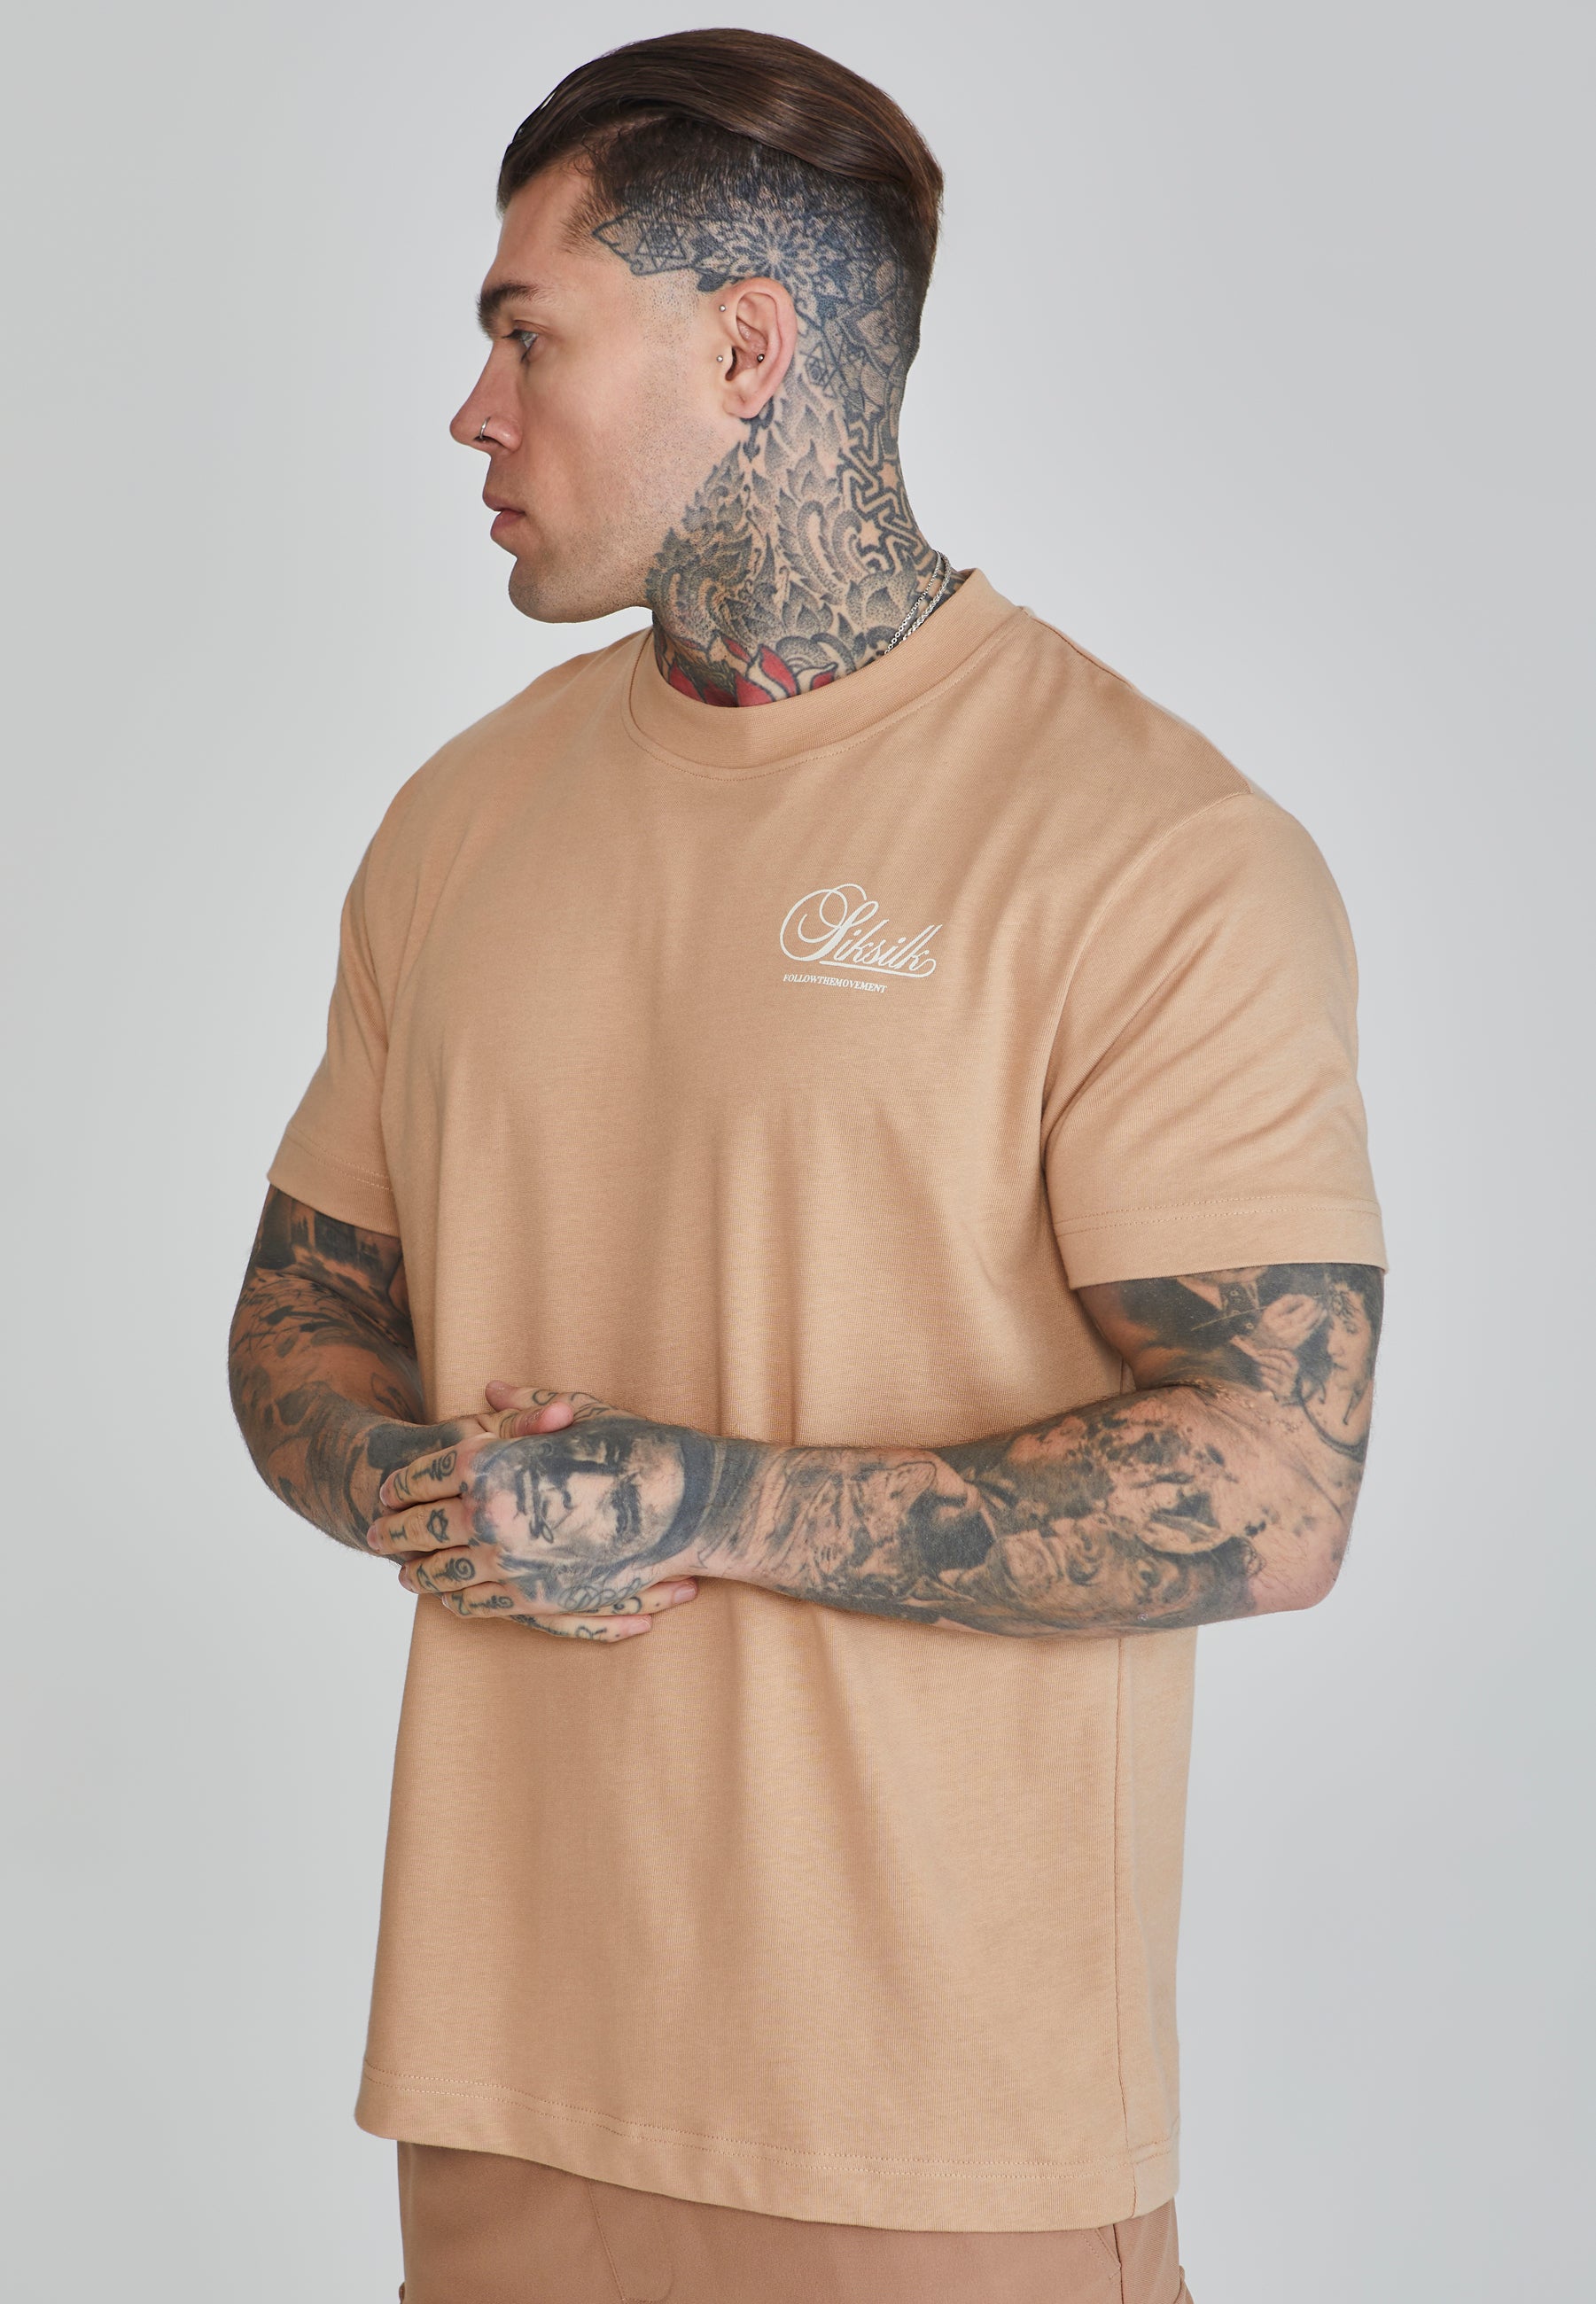 Graphic T-Shirt in Brown